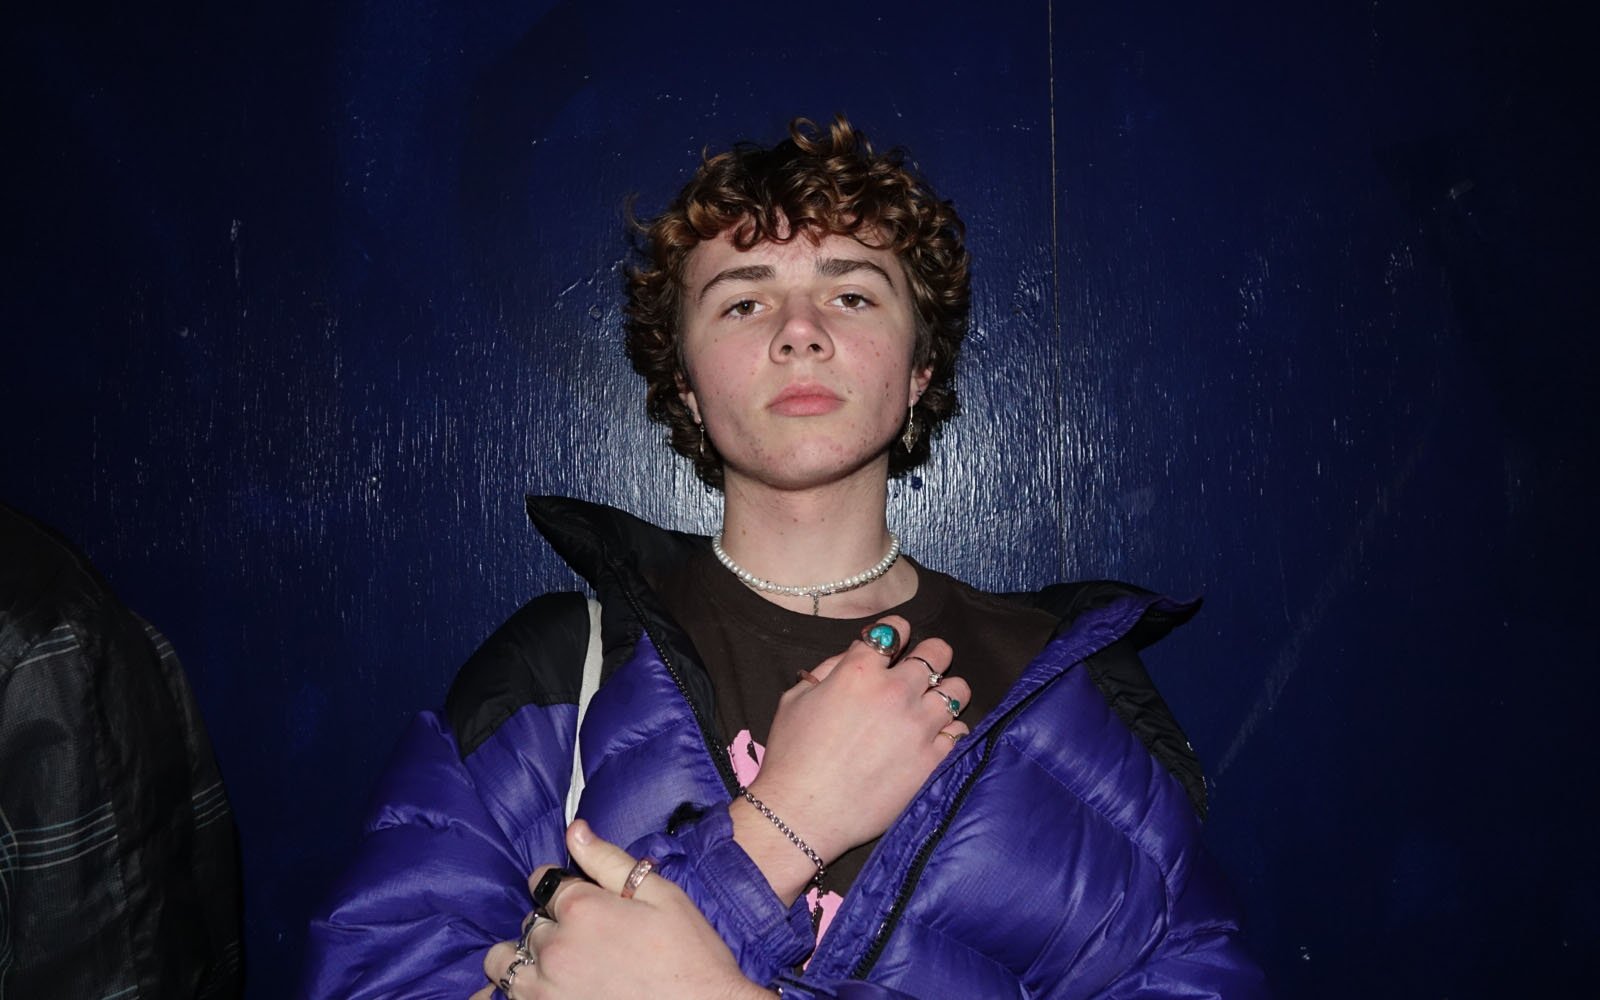 Young person with blue jacket and many rings